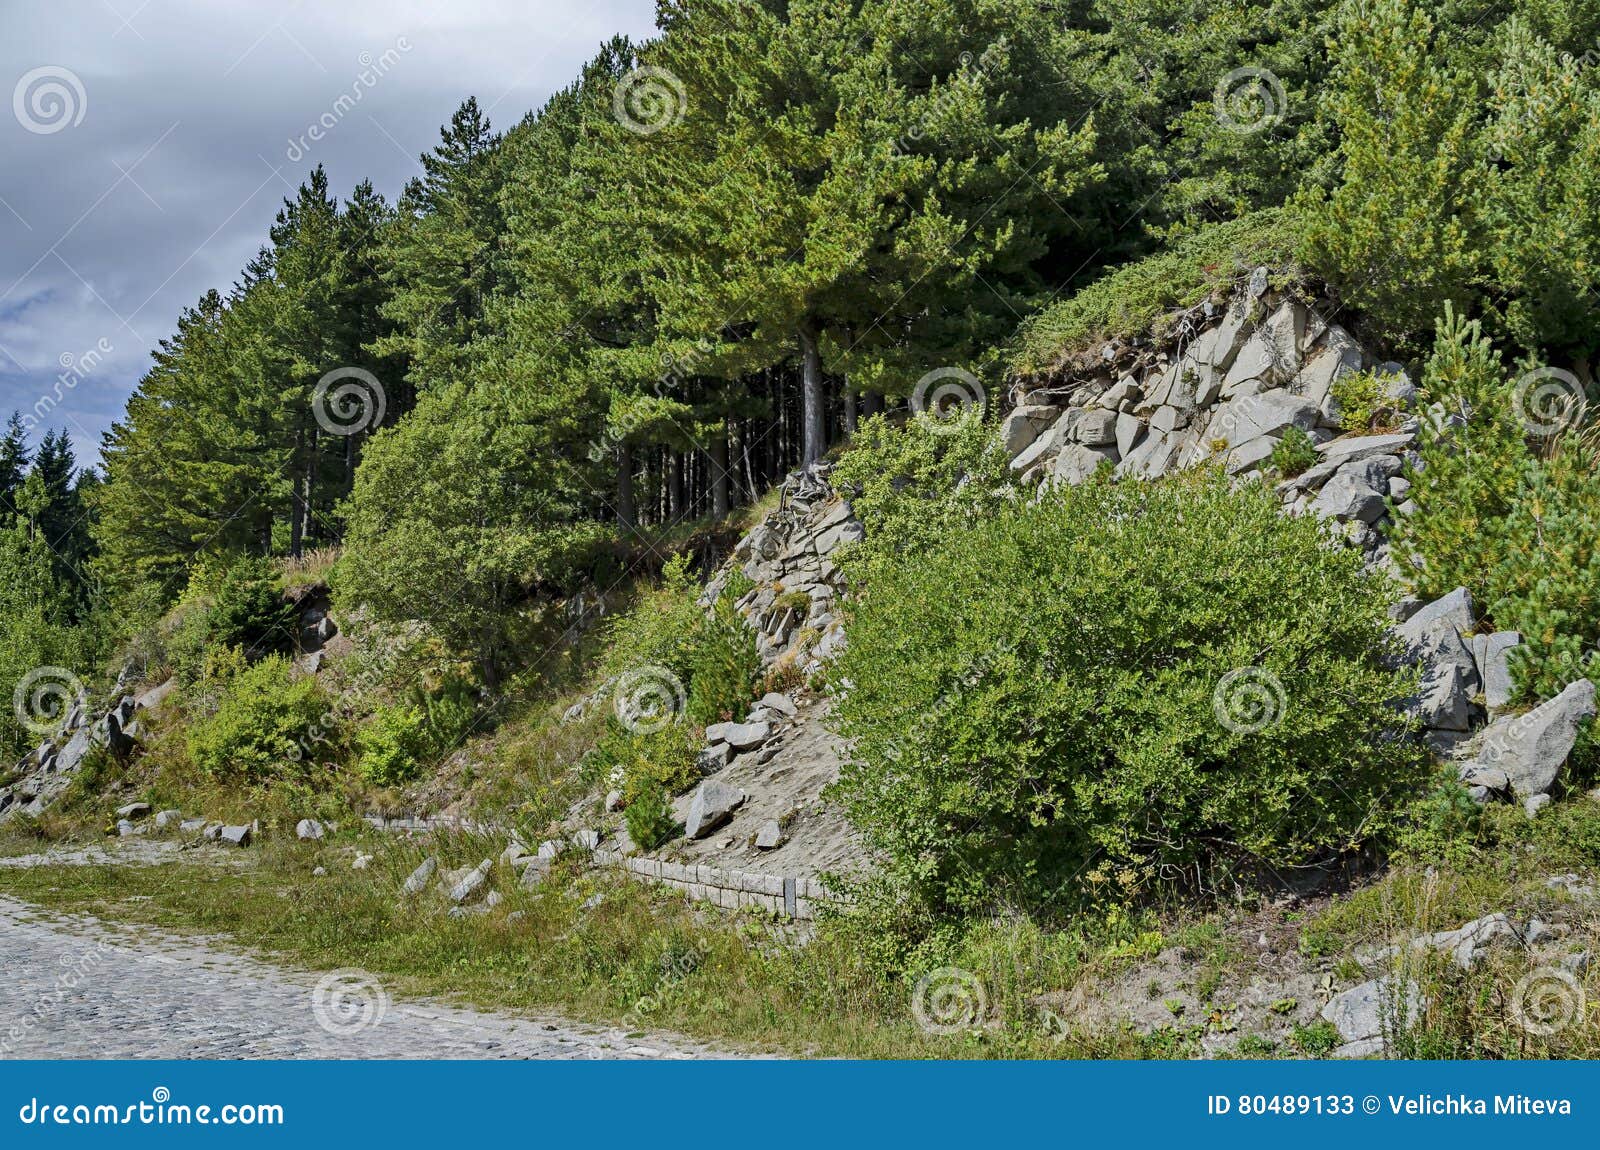 green forest on rocky hill and road near by hija or rest-house aleko in vitosha mountain